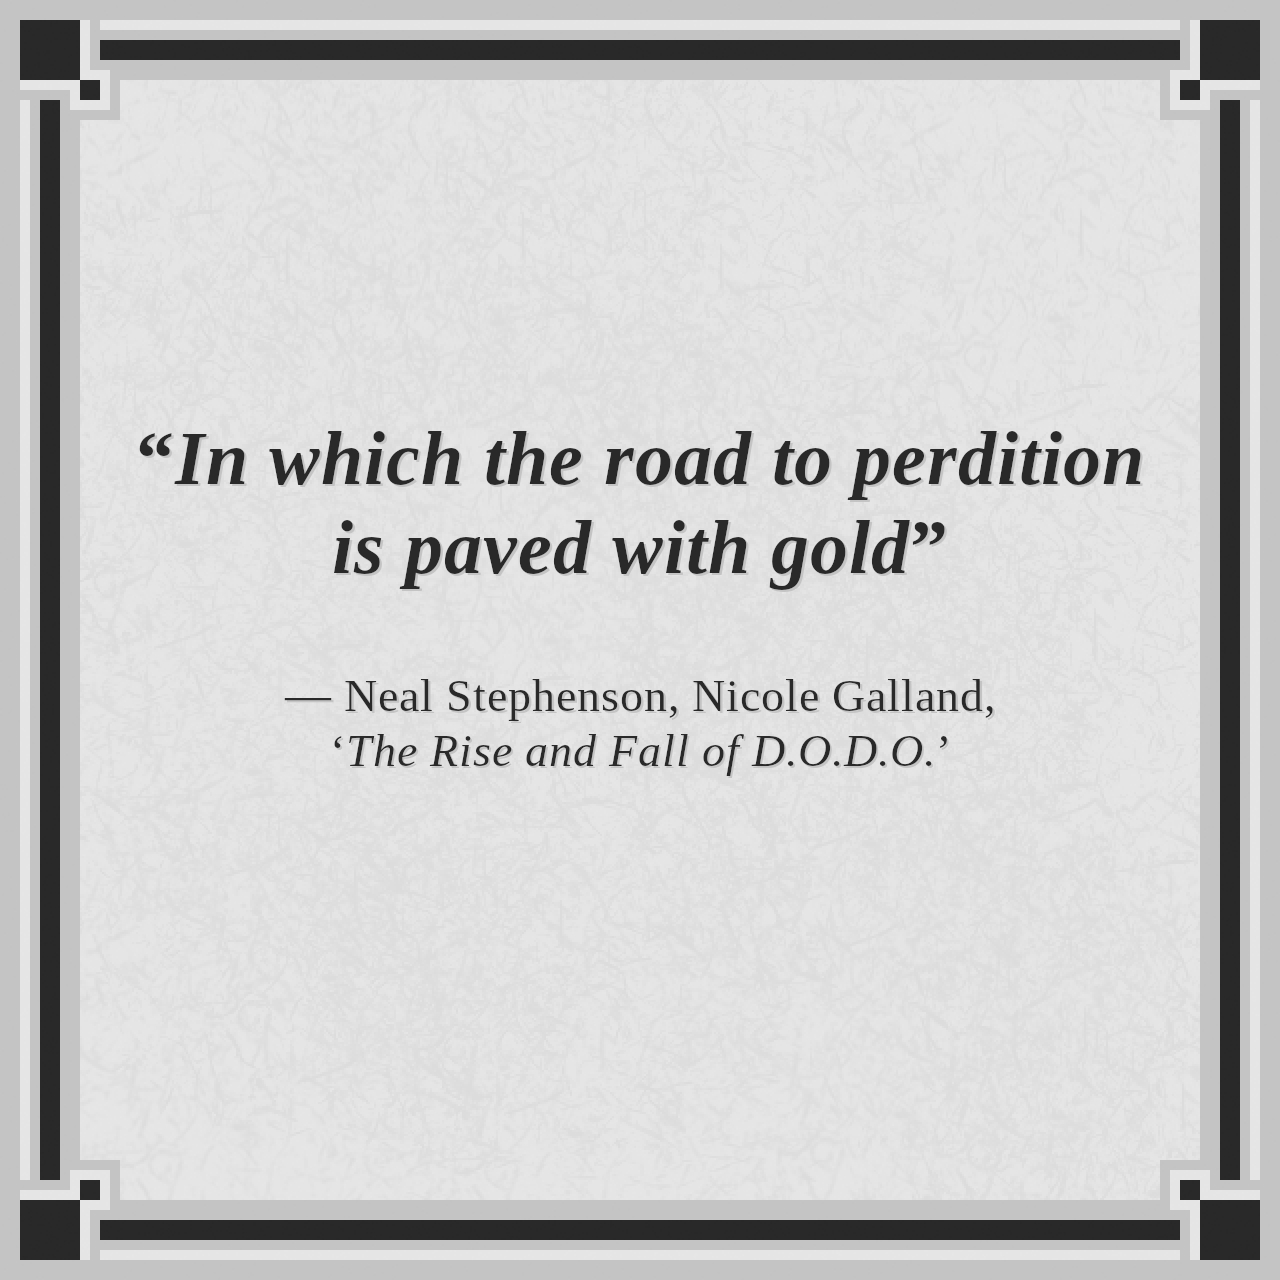 “In which the road to perdition is paved with gold”

— Neal Stephenson, Nicole Galland, ‘The Rise and Fall of D.O.D.O.’